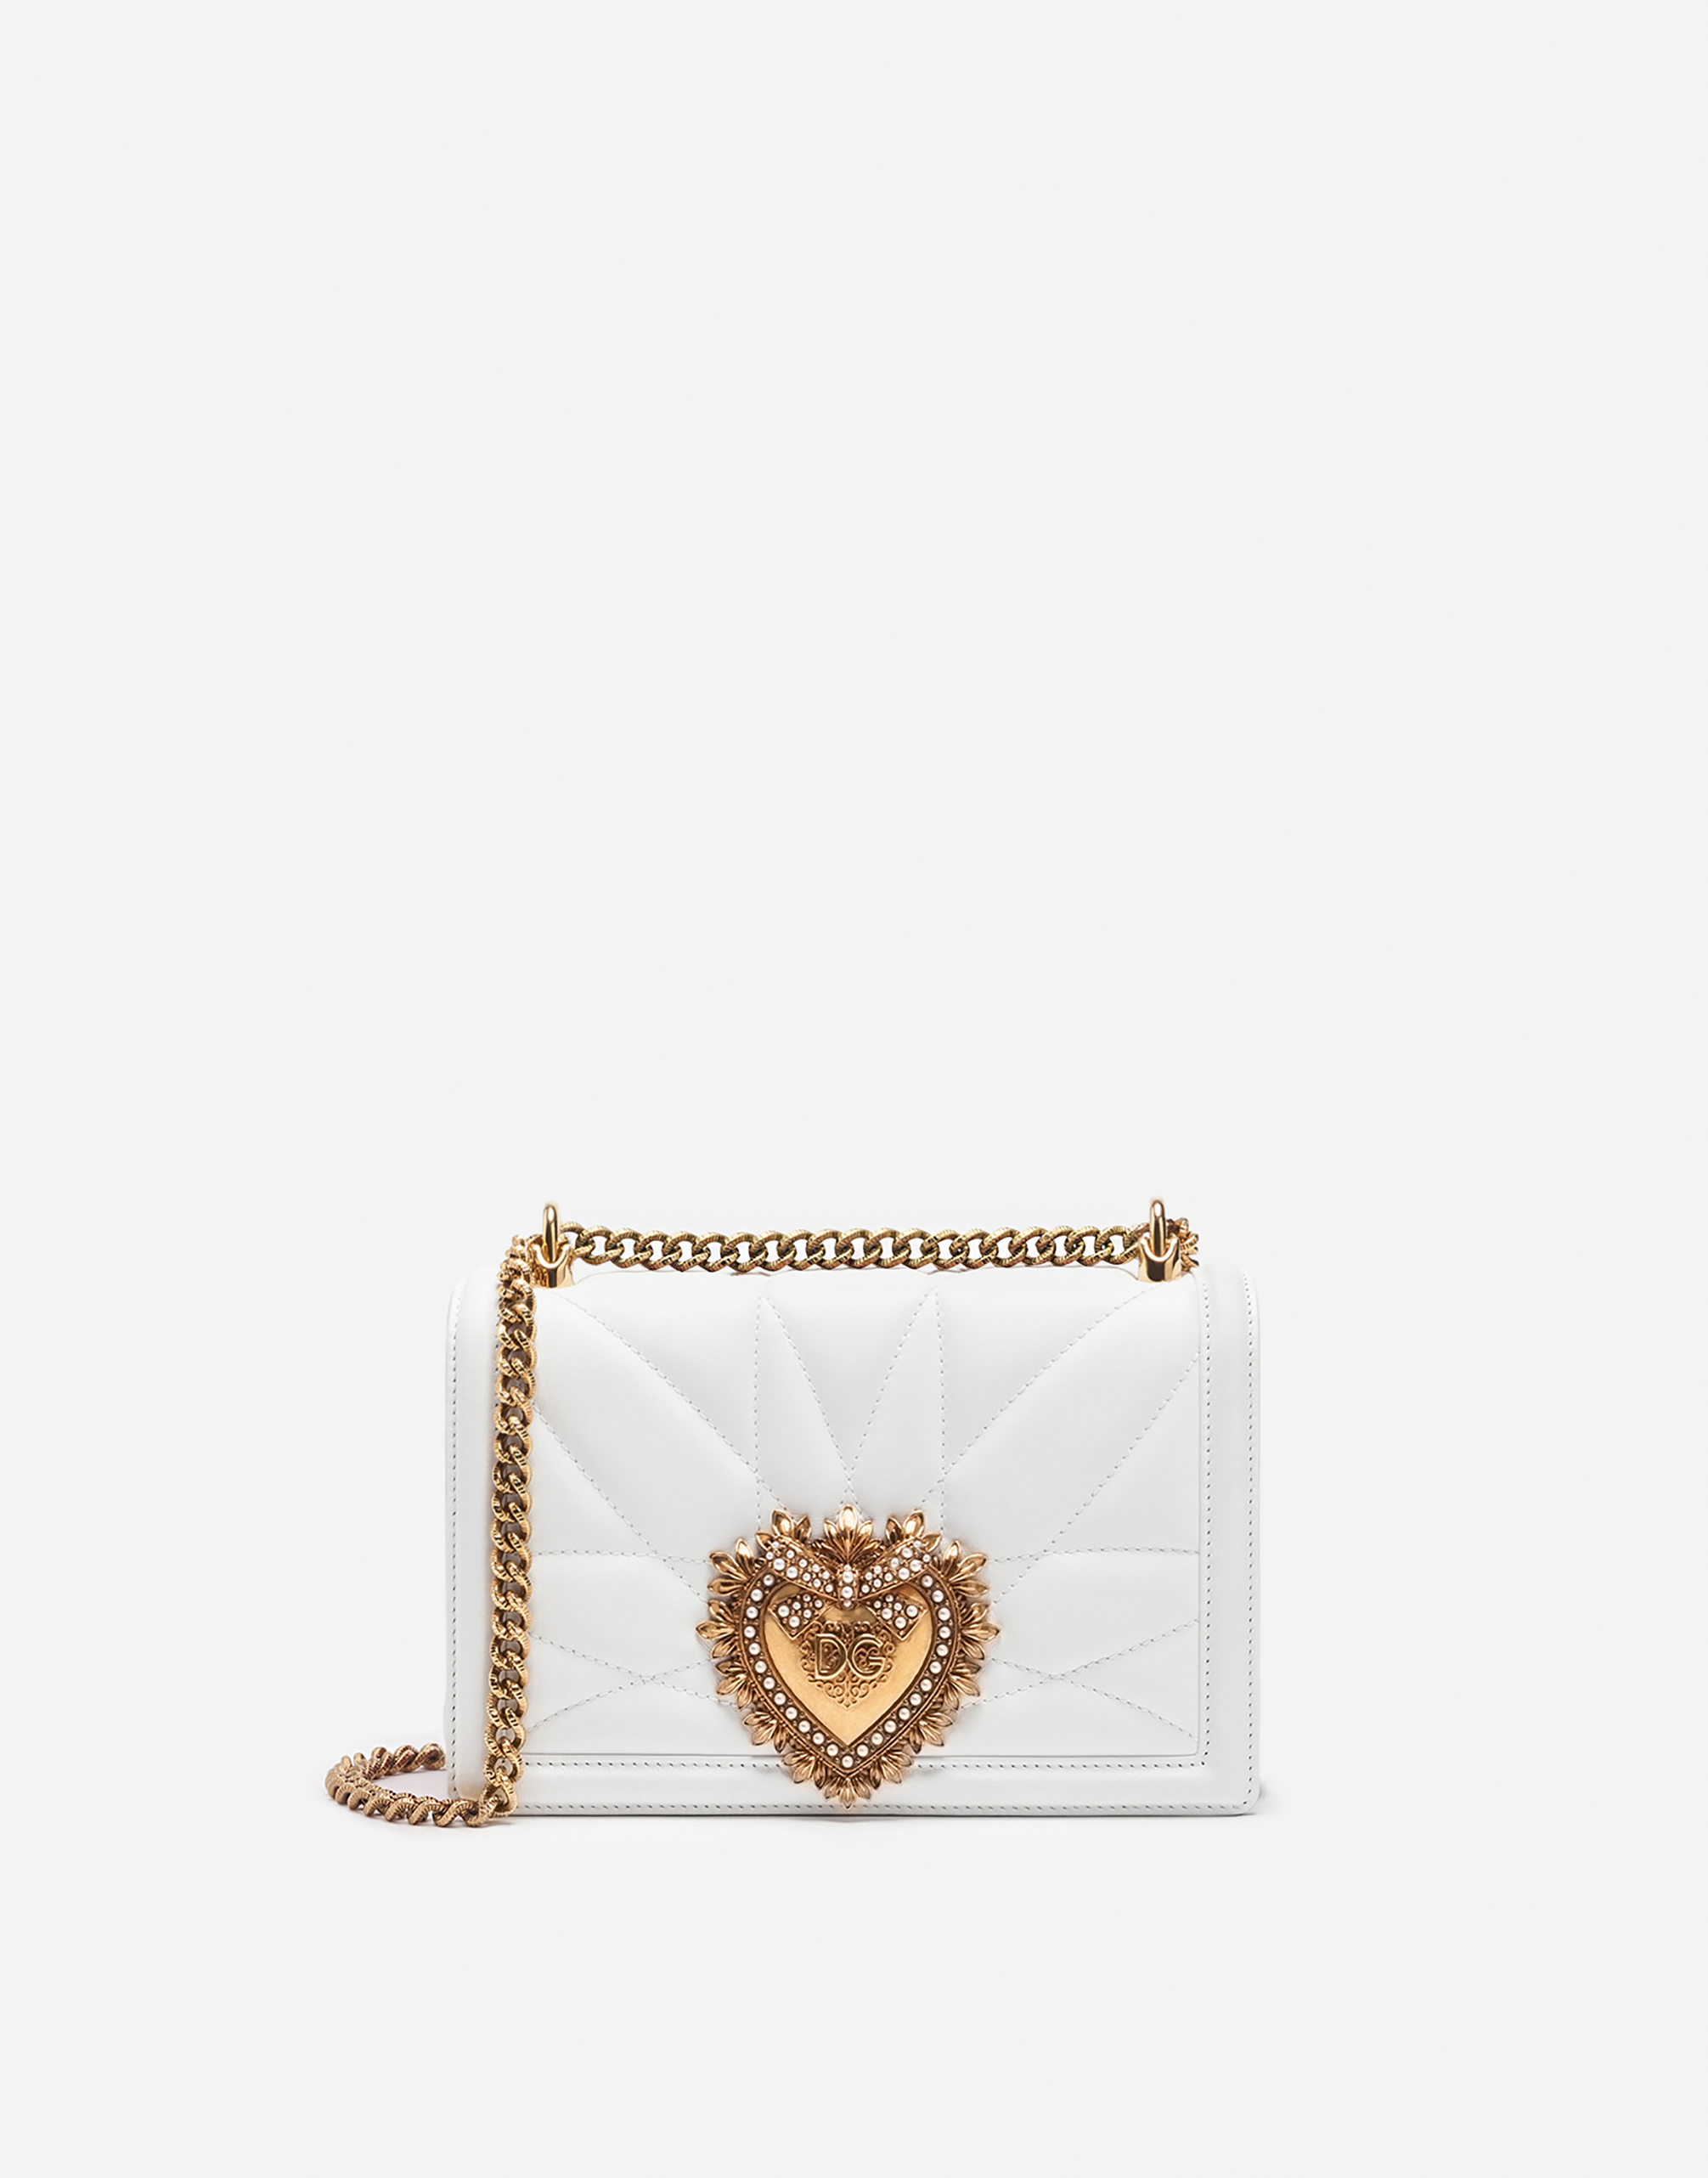 Medium Devotion bag in quilted nappa leather in Optical White